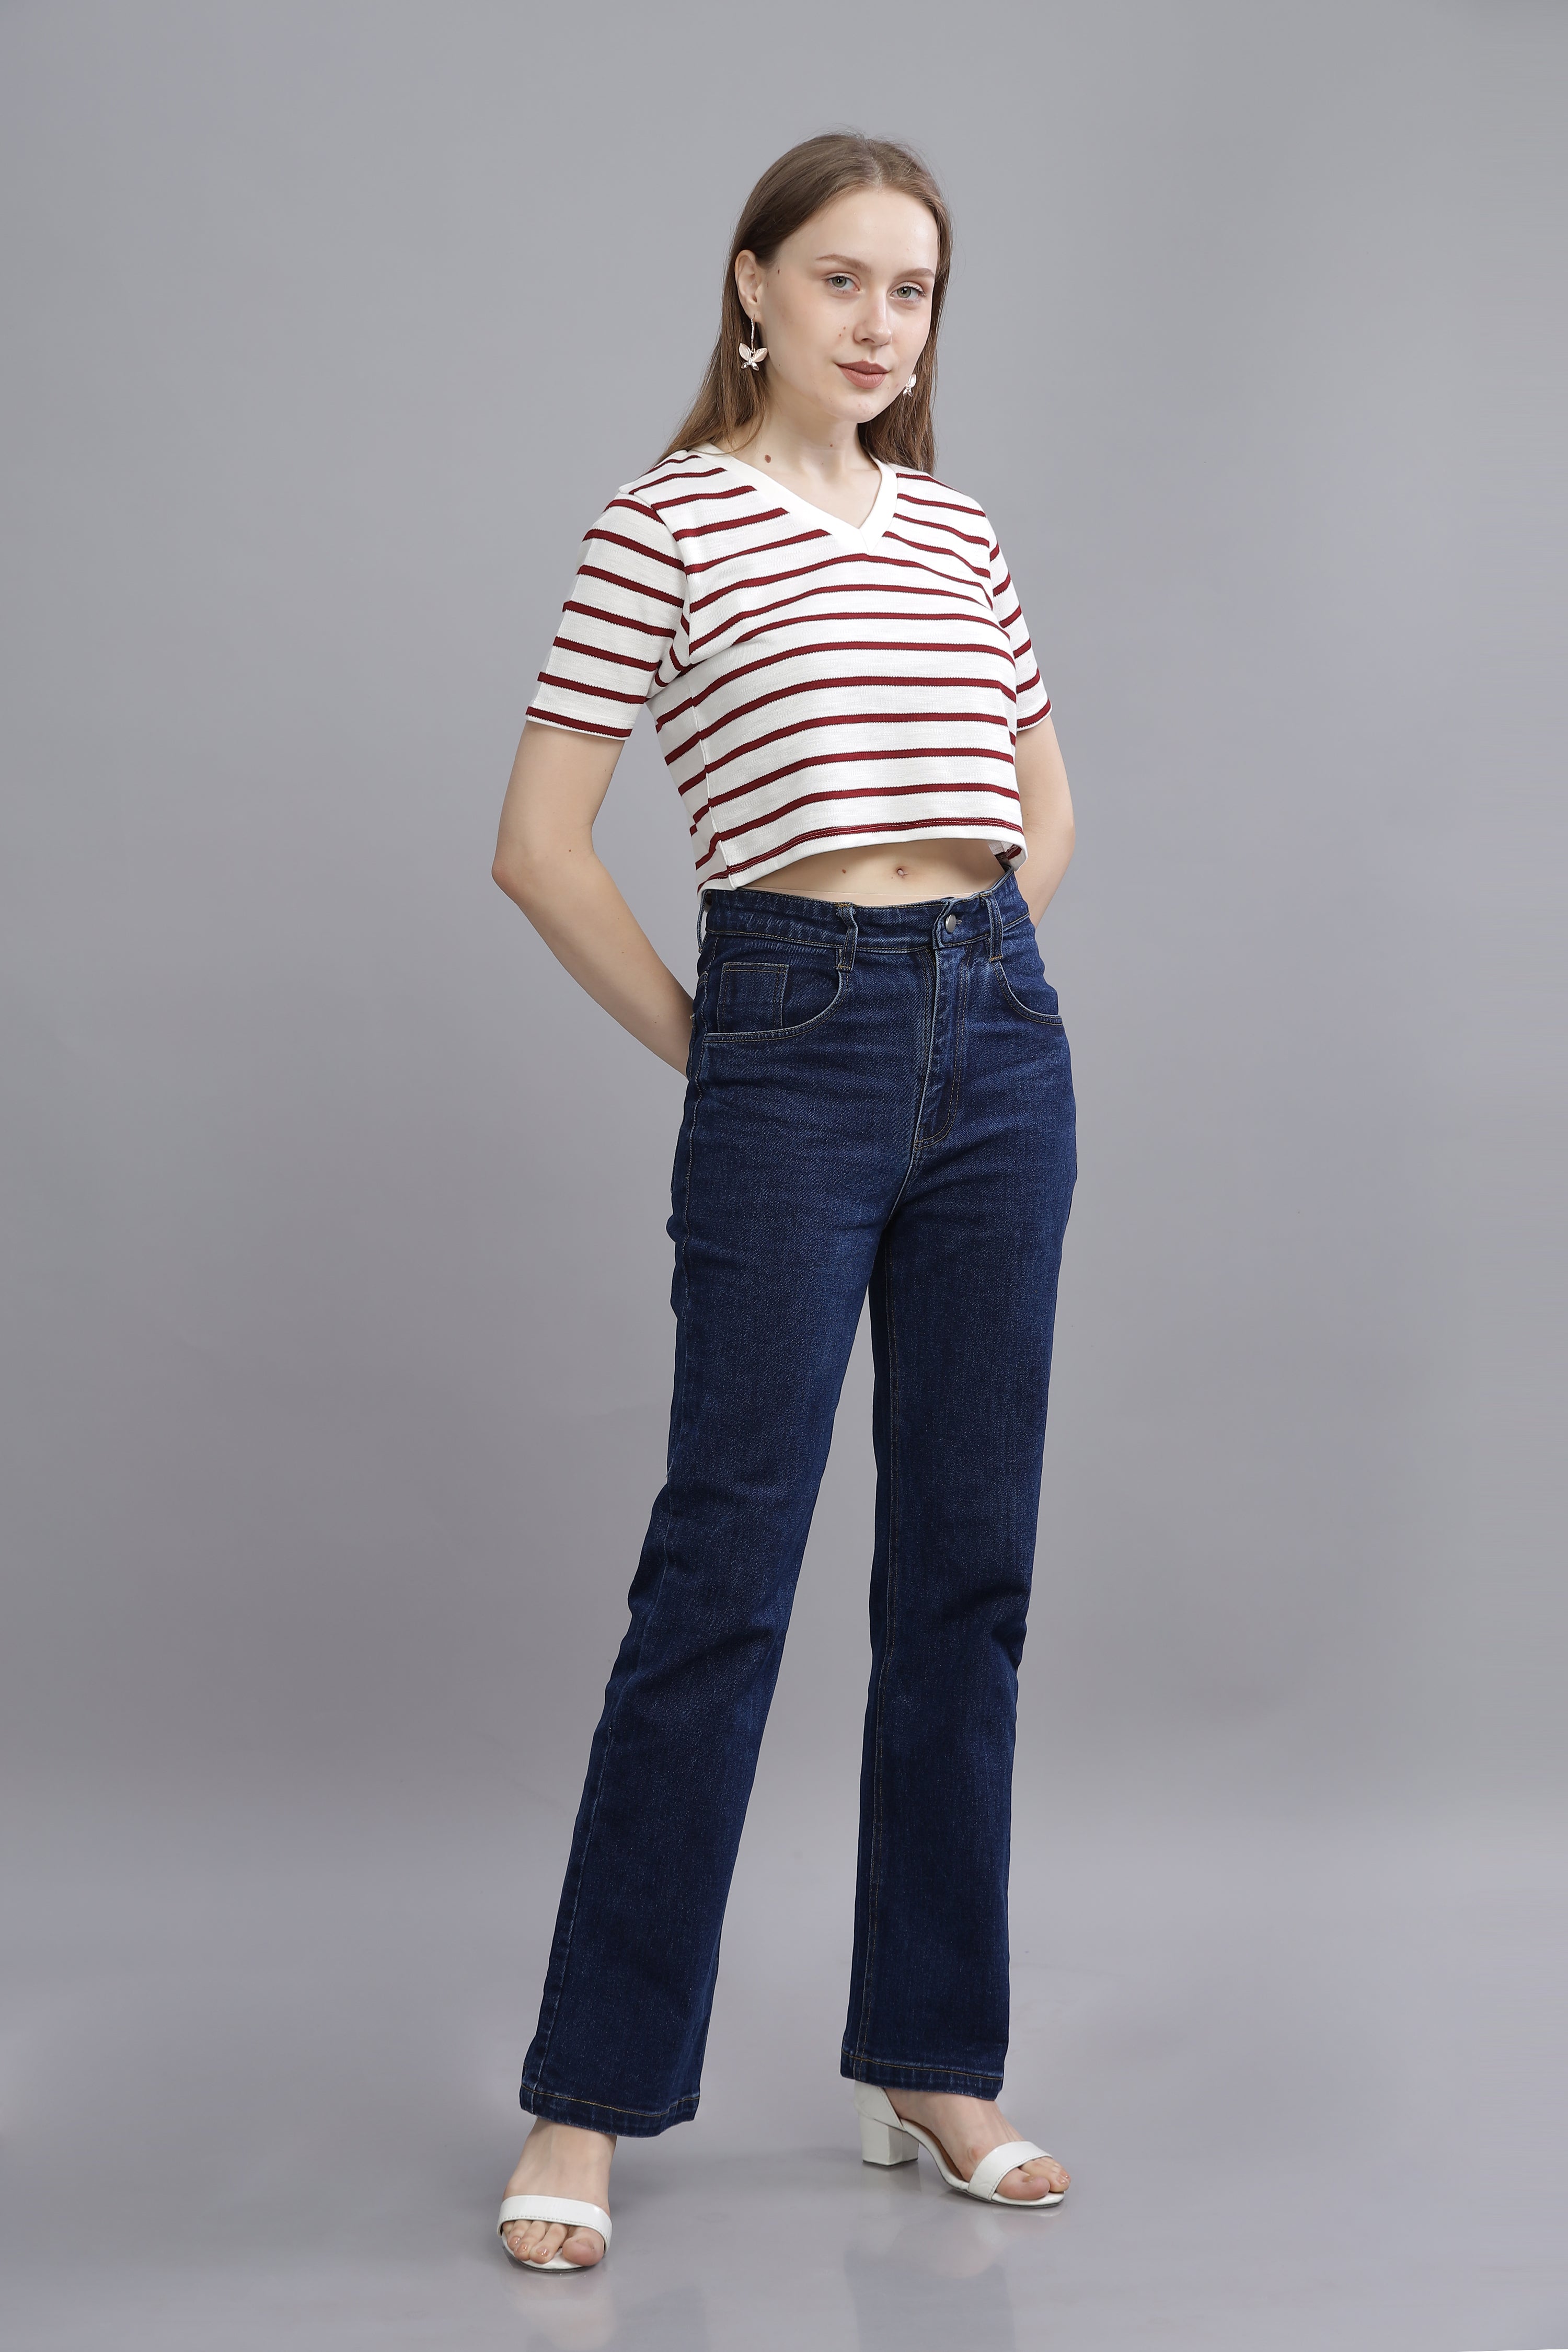 Women's Knitted Striped Top